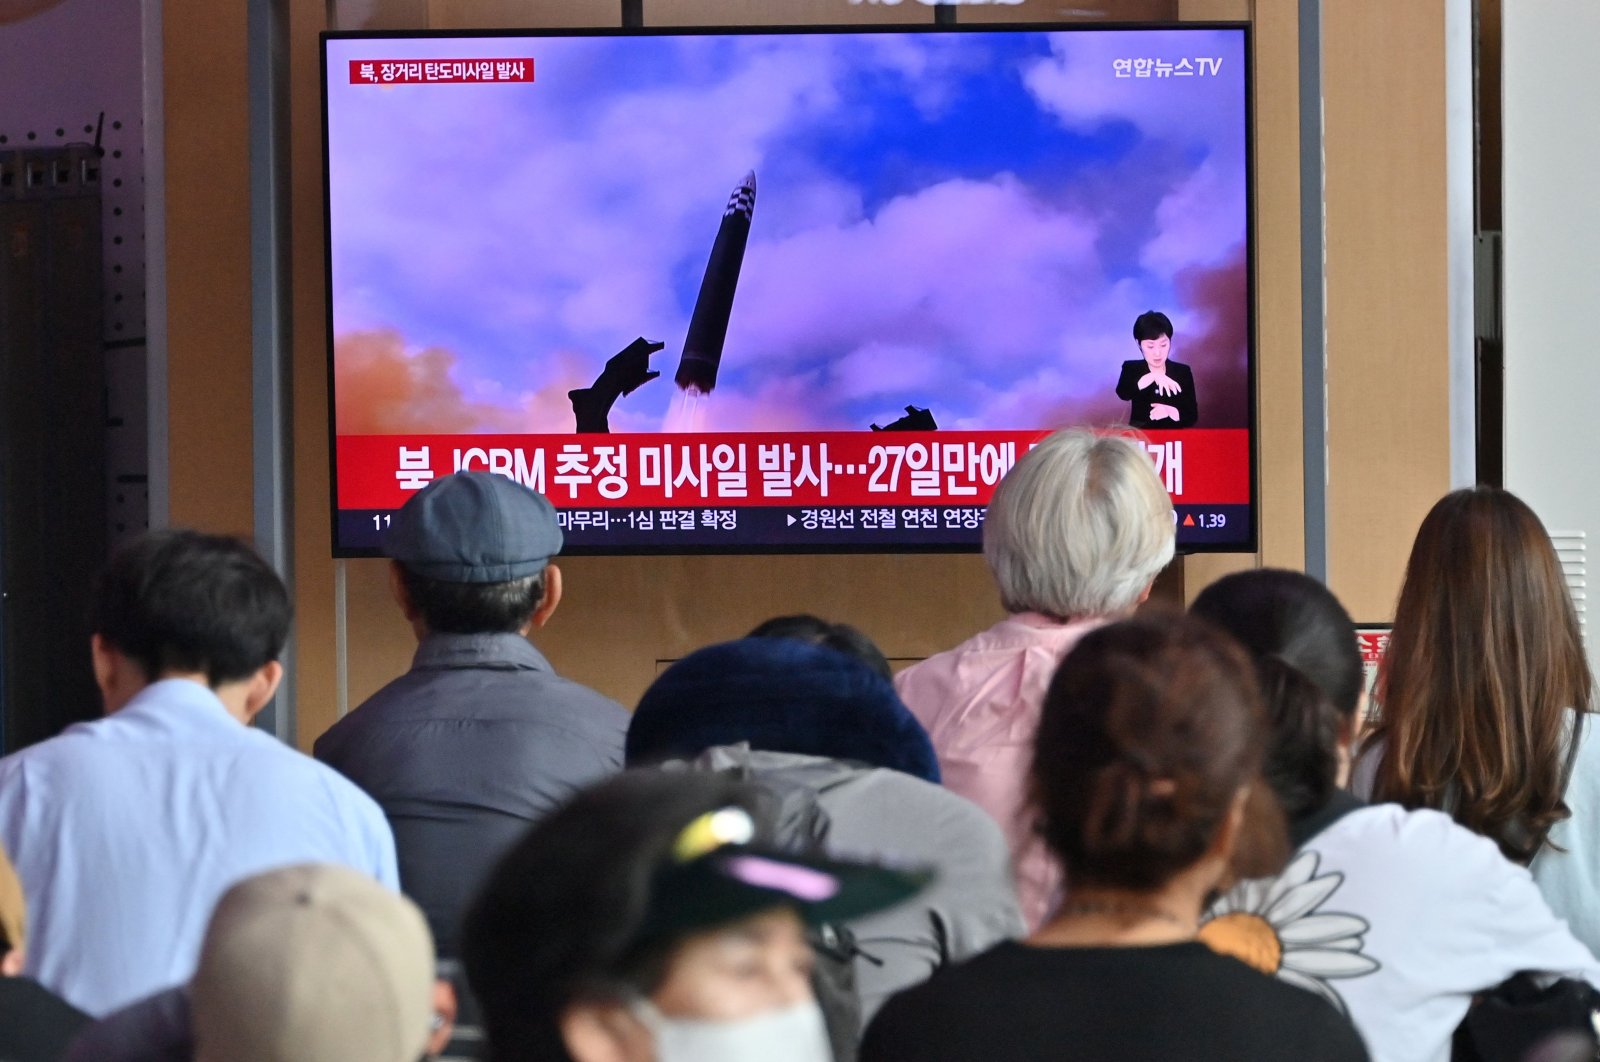 People watch a television screen showing a news broadcast with file footage of a North Korean missile test, Seoul, South Korea, July 12, 2023. (AFP Photo)